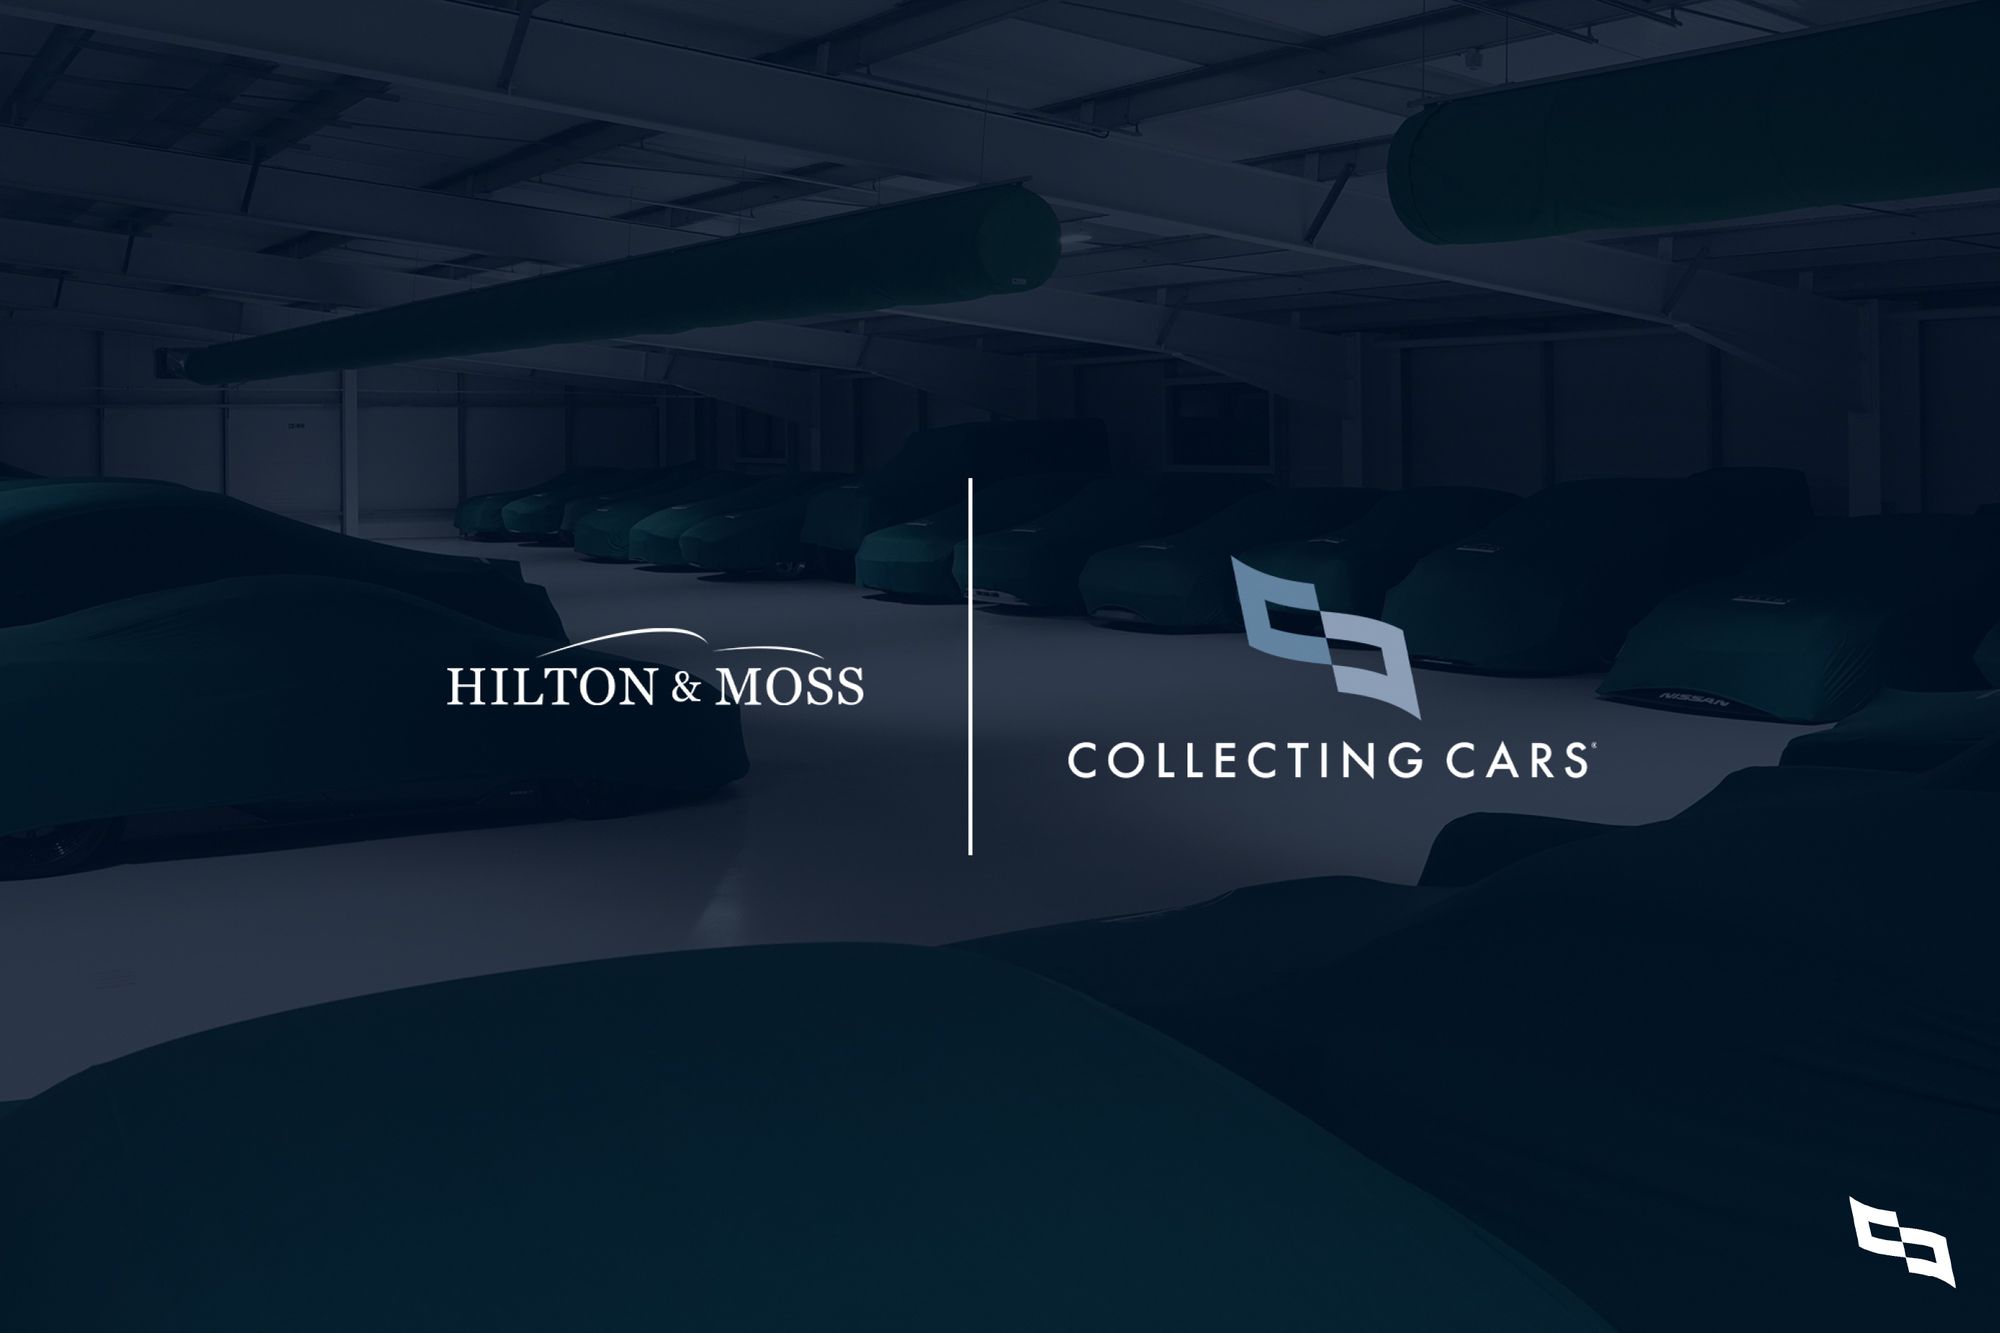 Hilton & Moss partners with Collecting Cars